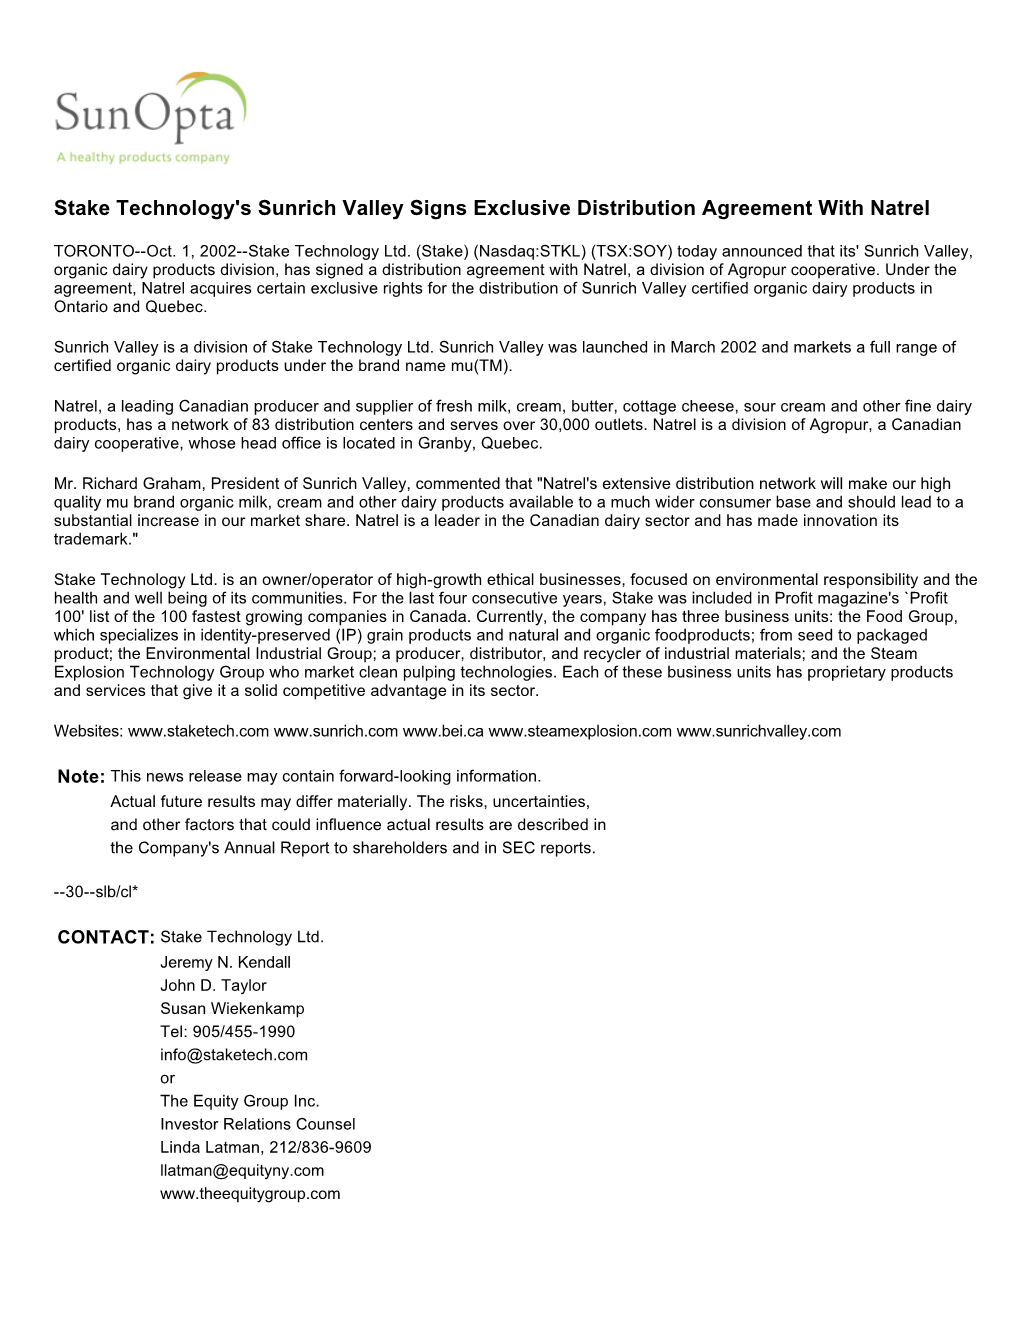 Stake Technology's Sunrich Valley Signs Exclusive Distribution Agreement with Natrel